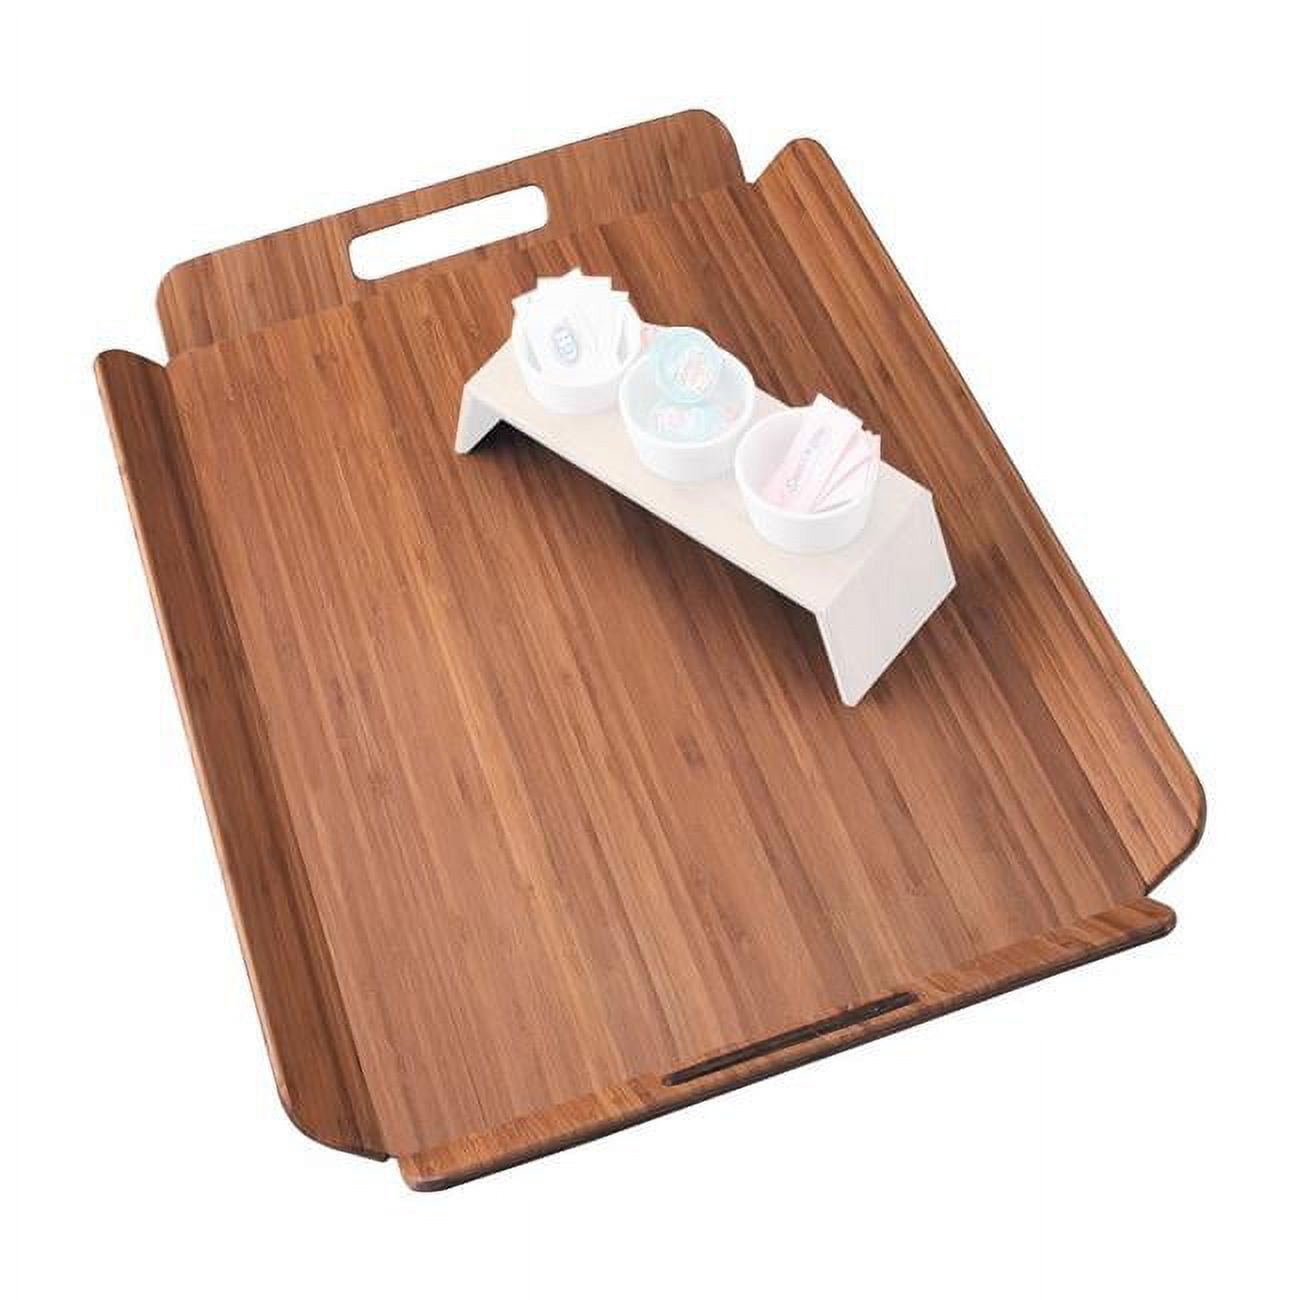 958-1-60 Bamboo Room Service Tray - 22.5 X 17 X 1.5 In.